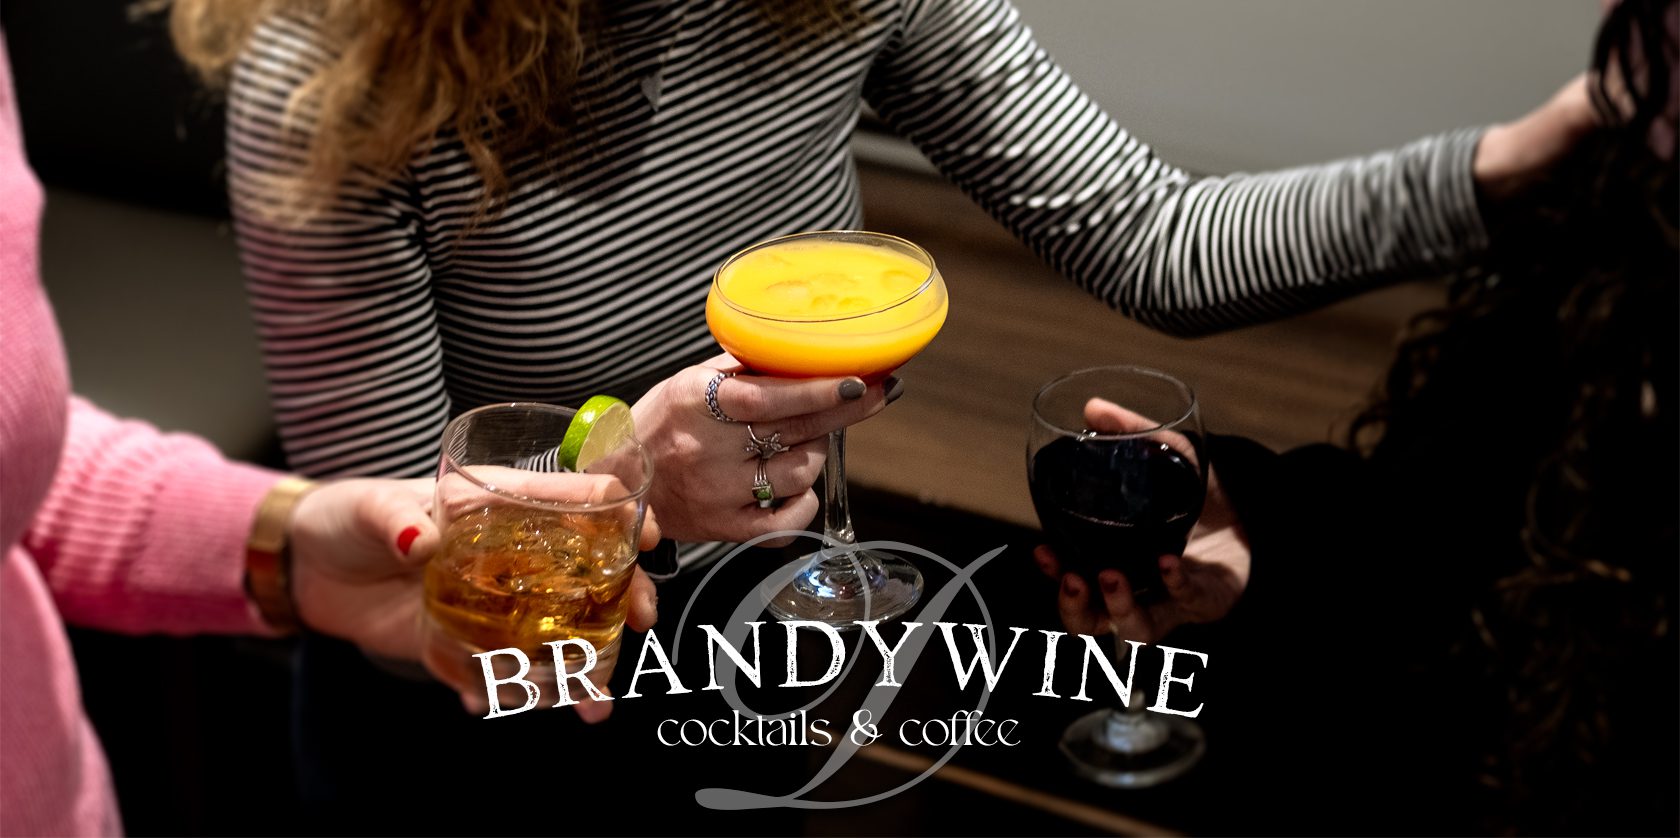 Brandywine cocktails and coffee